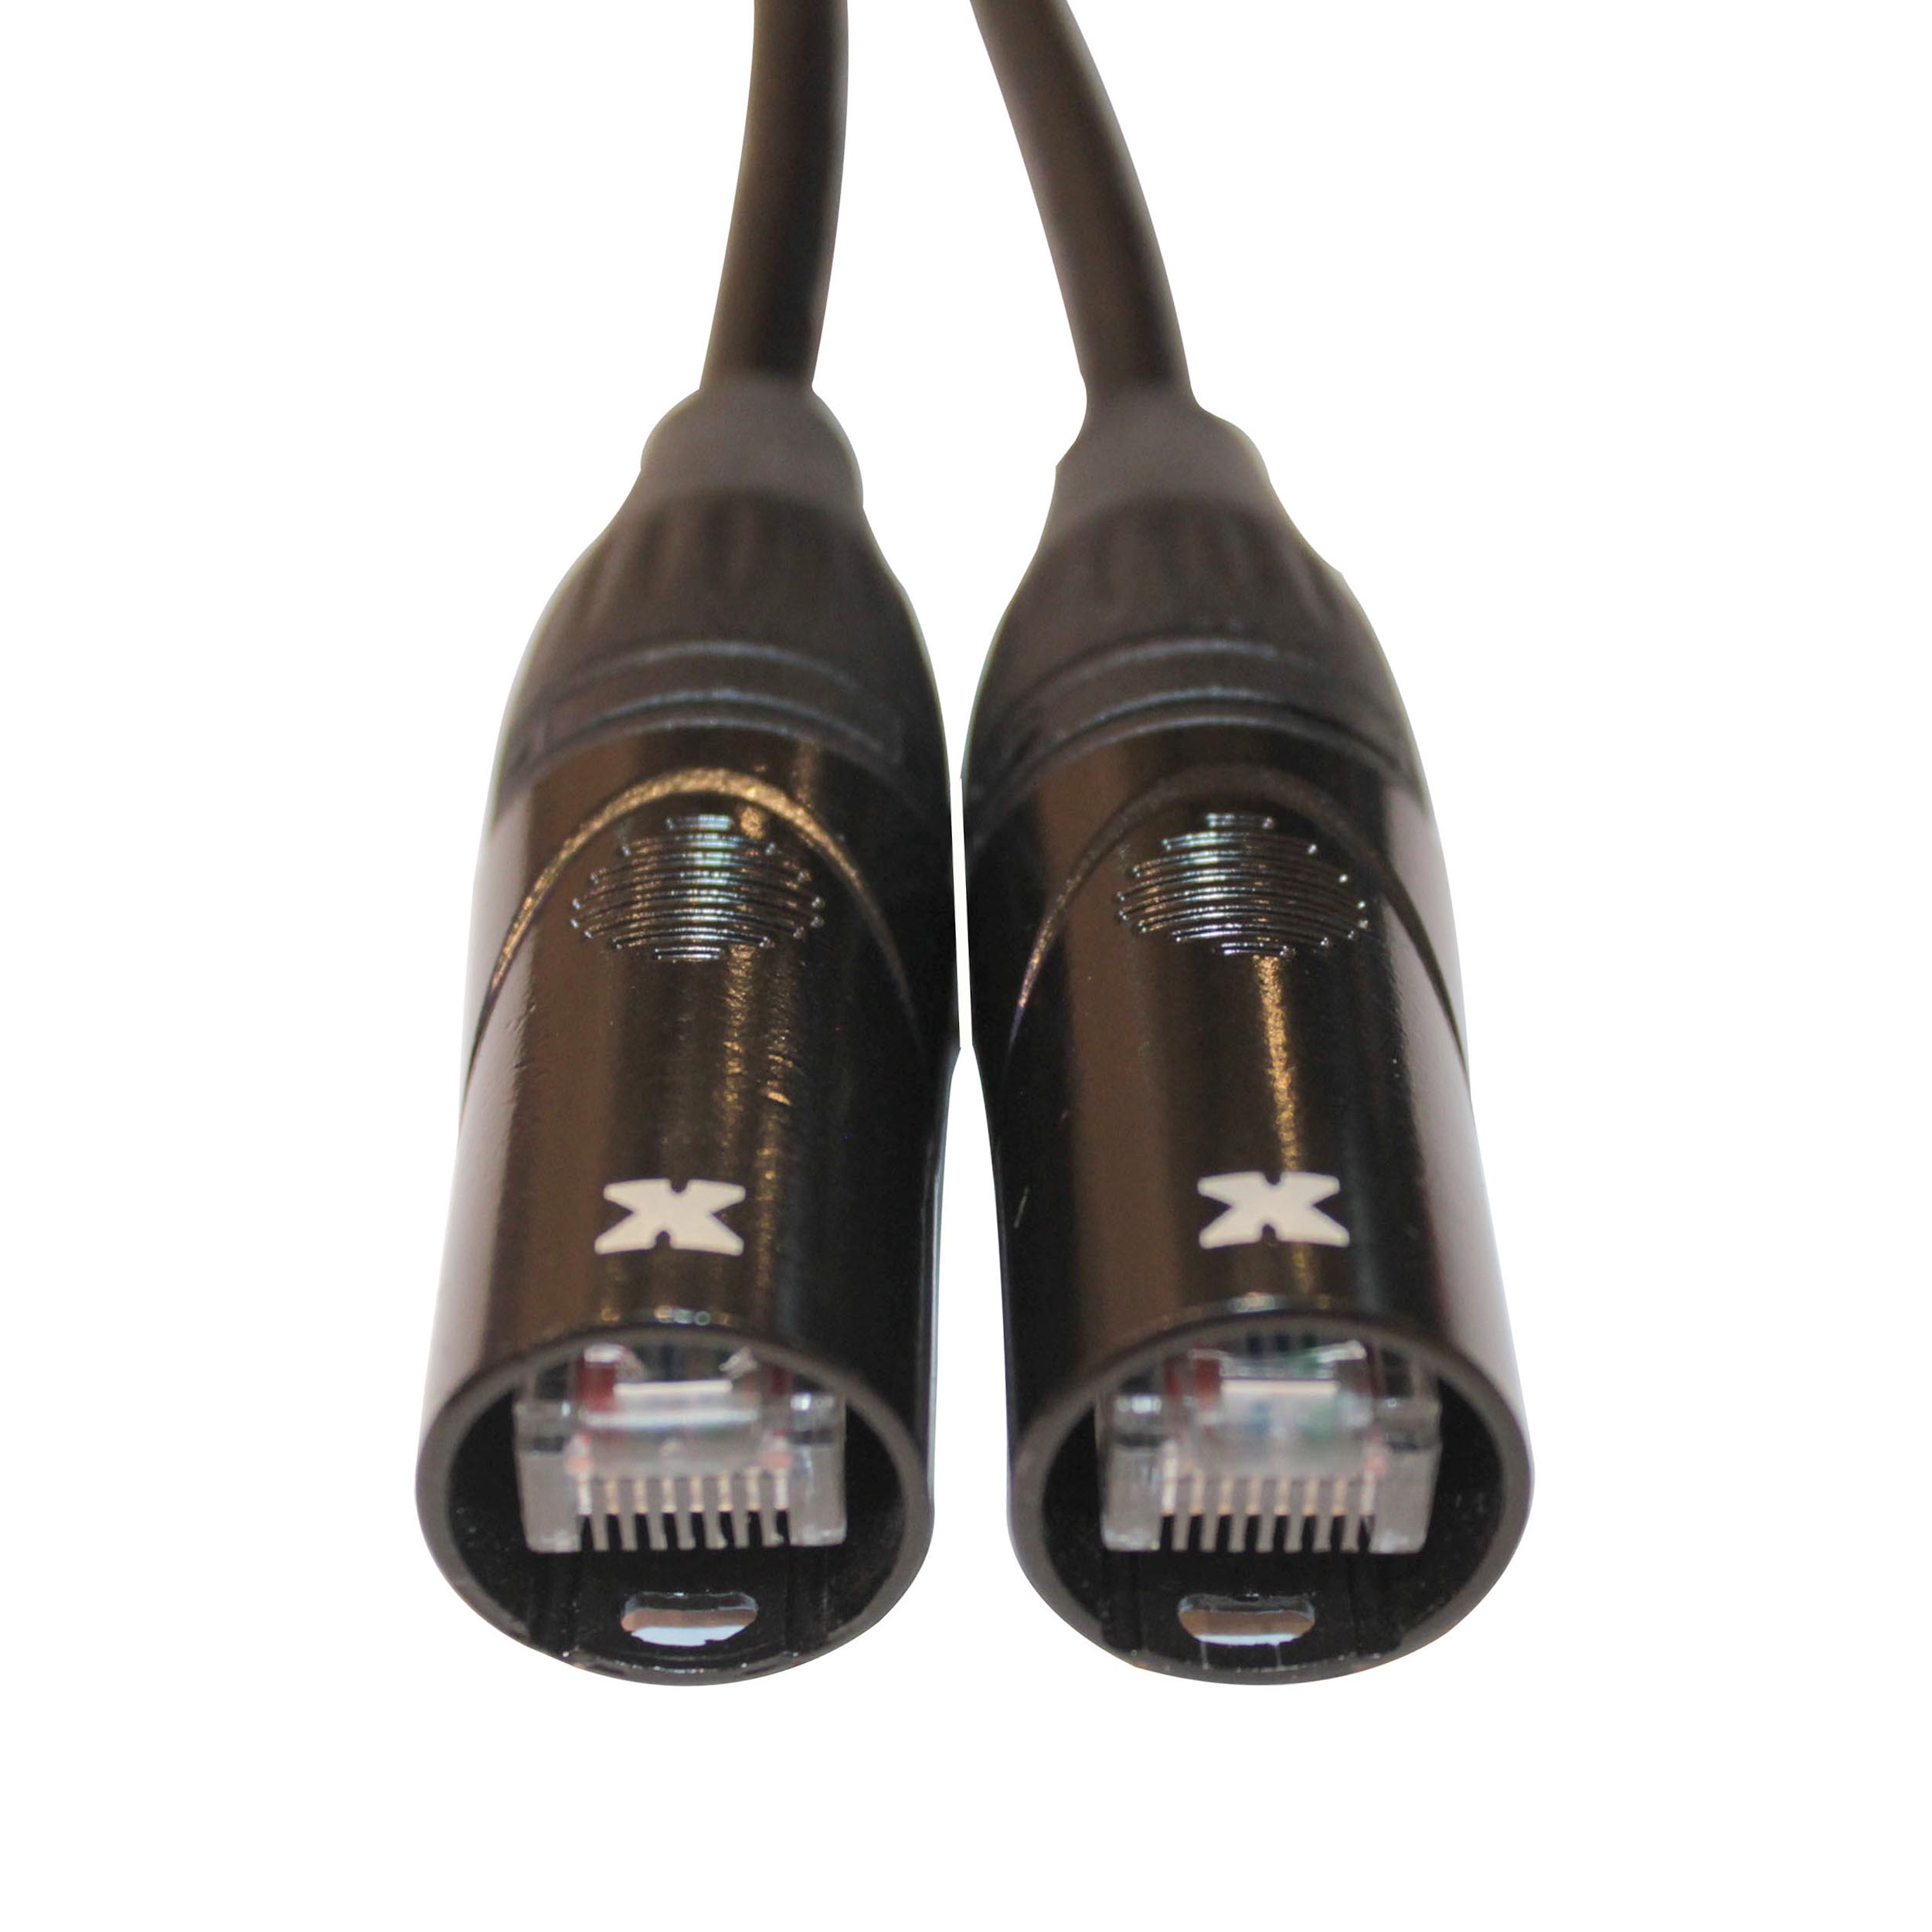 Utp 2 Ft 1 X Rj-45 Male Network Black Product Category: Hardware Connectivity/Connector C 0.6-M 2-Ft. Black Box Corporation Black Black Box Gigatrue 3 Cat6 550-Mhz Lockable Patch Cable - Category 6 For Network Device 1 X Rj-45 Male Network 